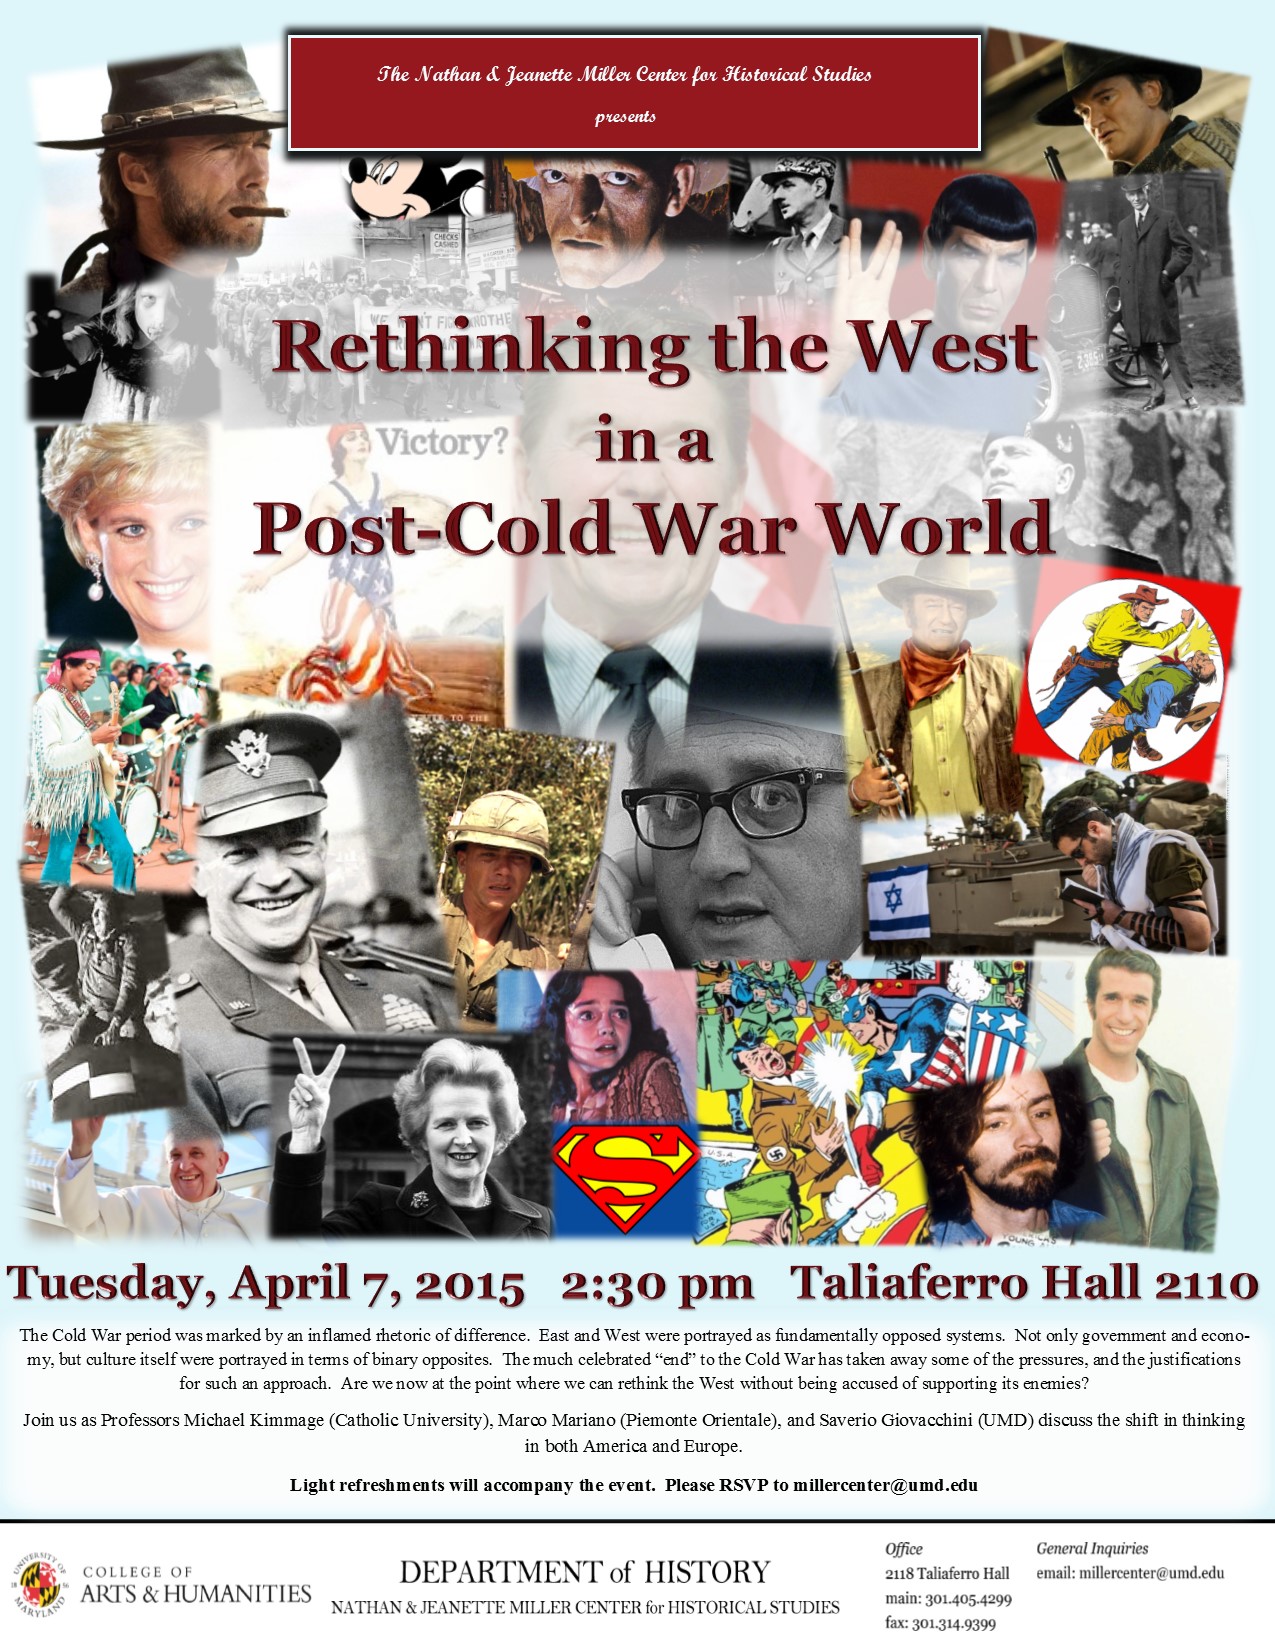 Image for event - Rethinking the West in a Post-Cold War World